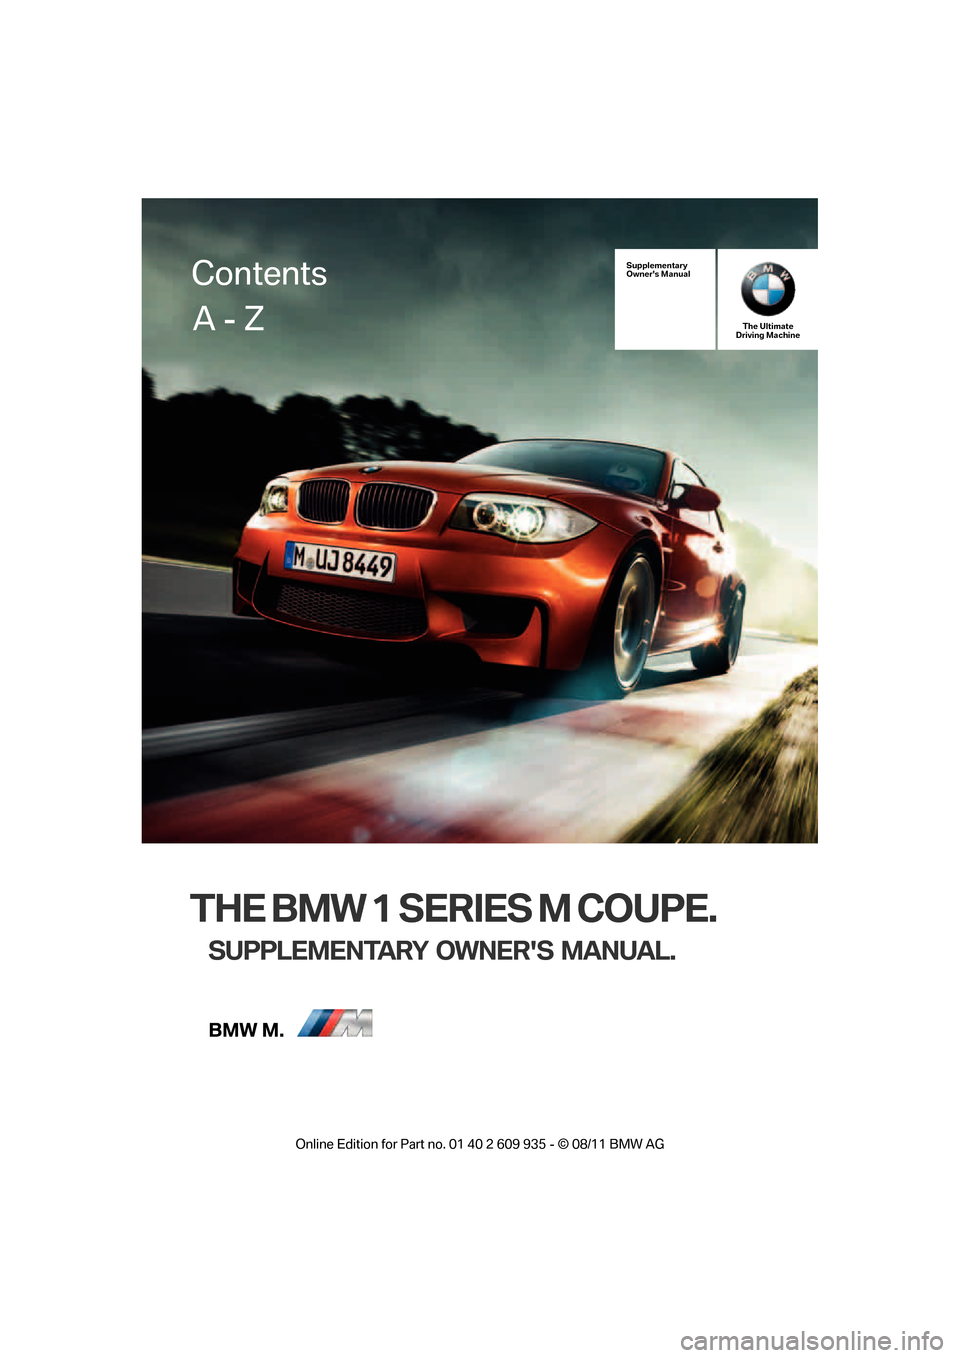 BMW 1M 2011 E82 Owners Manual THE BMW 1 SERIES M COUPE.
SUPPLEMENTARY OWNERS MANUAL.
Supplementary
Owners ManualThe Ultimate
Driving Machine
Contents
A - Z
Online  Edition  for Part  no. 01 40 2 609  935 - \251  08/11  BMW AG  